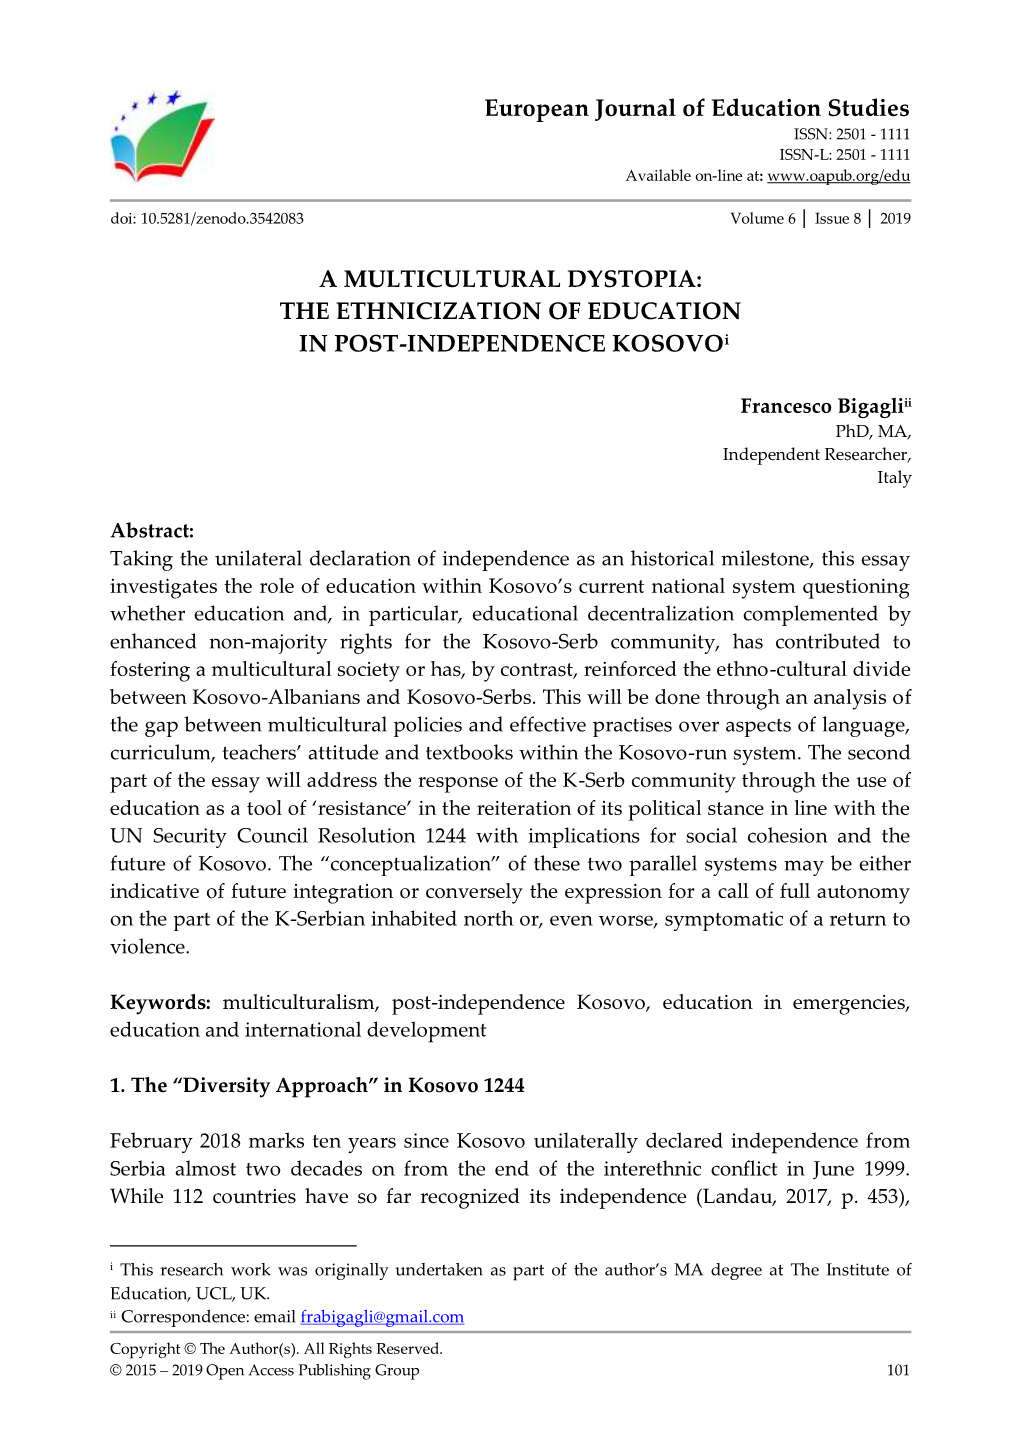 European Journal of Education Studies a MULTICULTURAL DYSTOPIA: the ETHNICIZATION of EDUCATION in POST-INDEPENDENCE Kosovoi